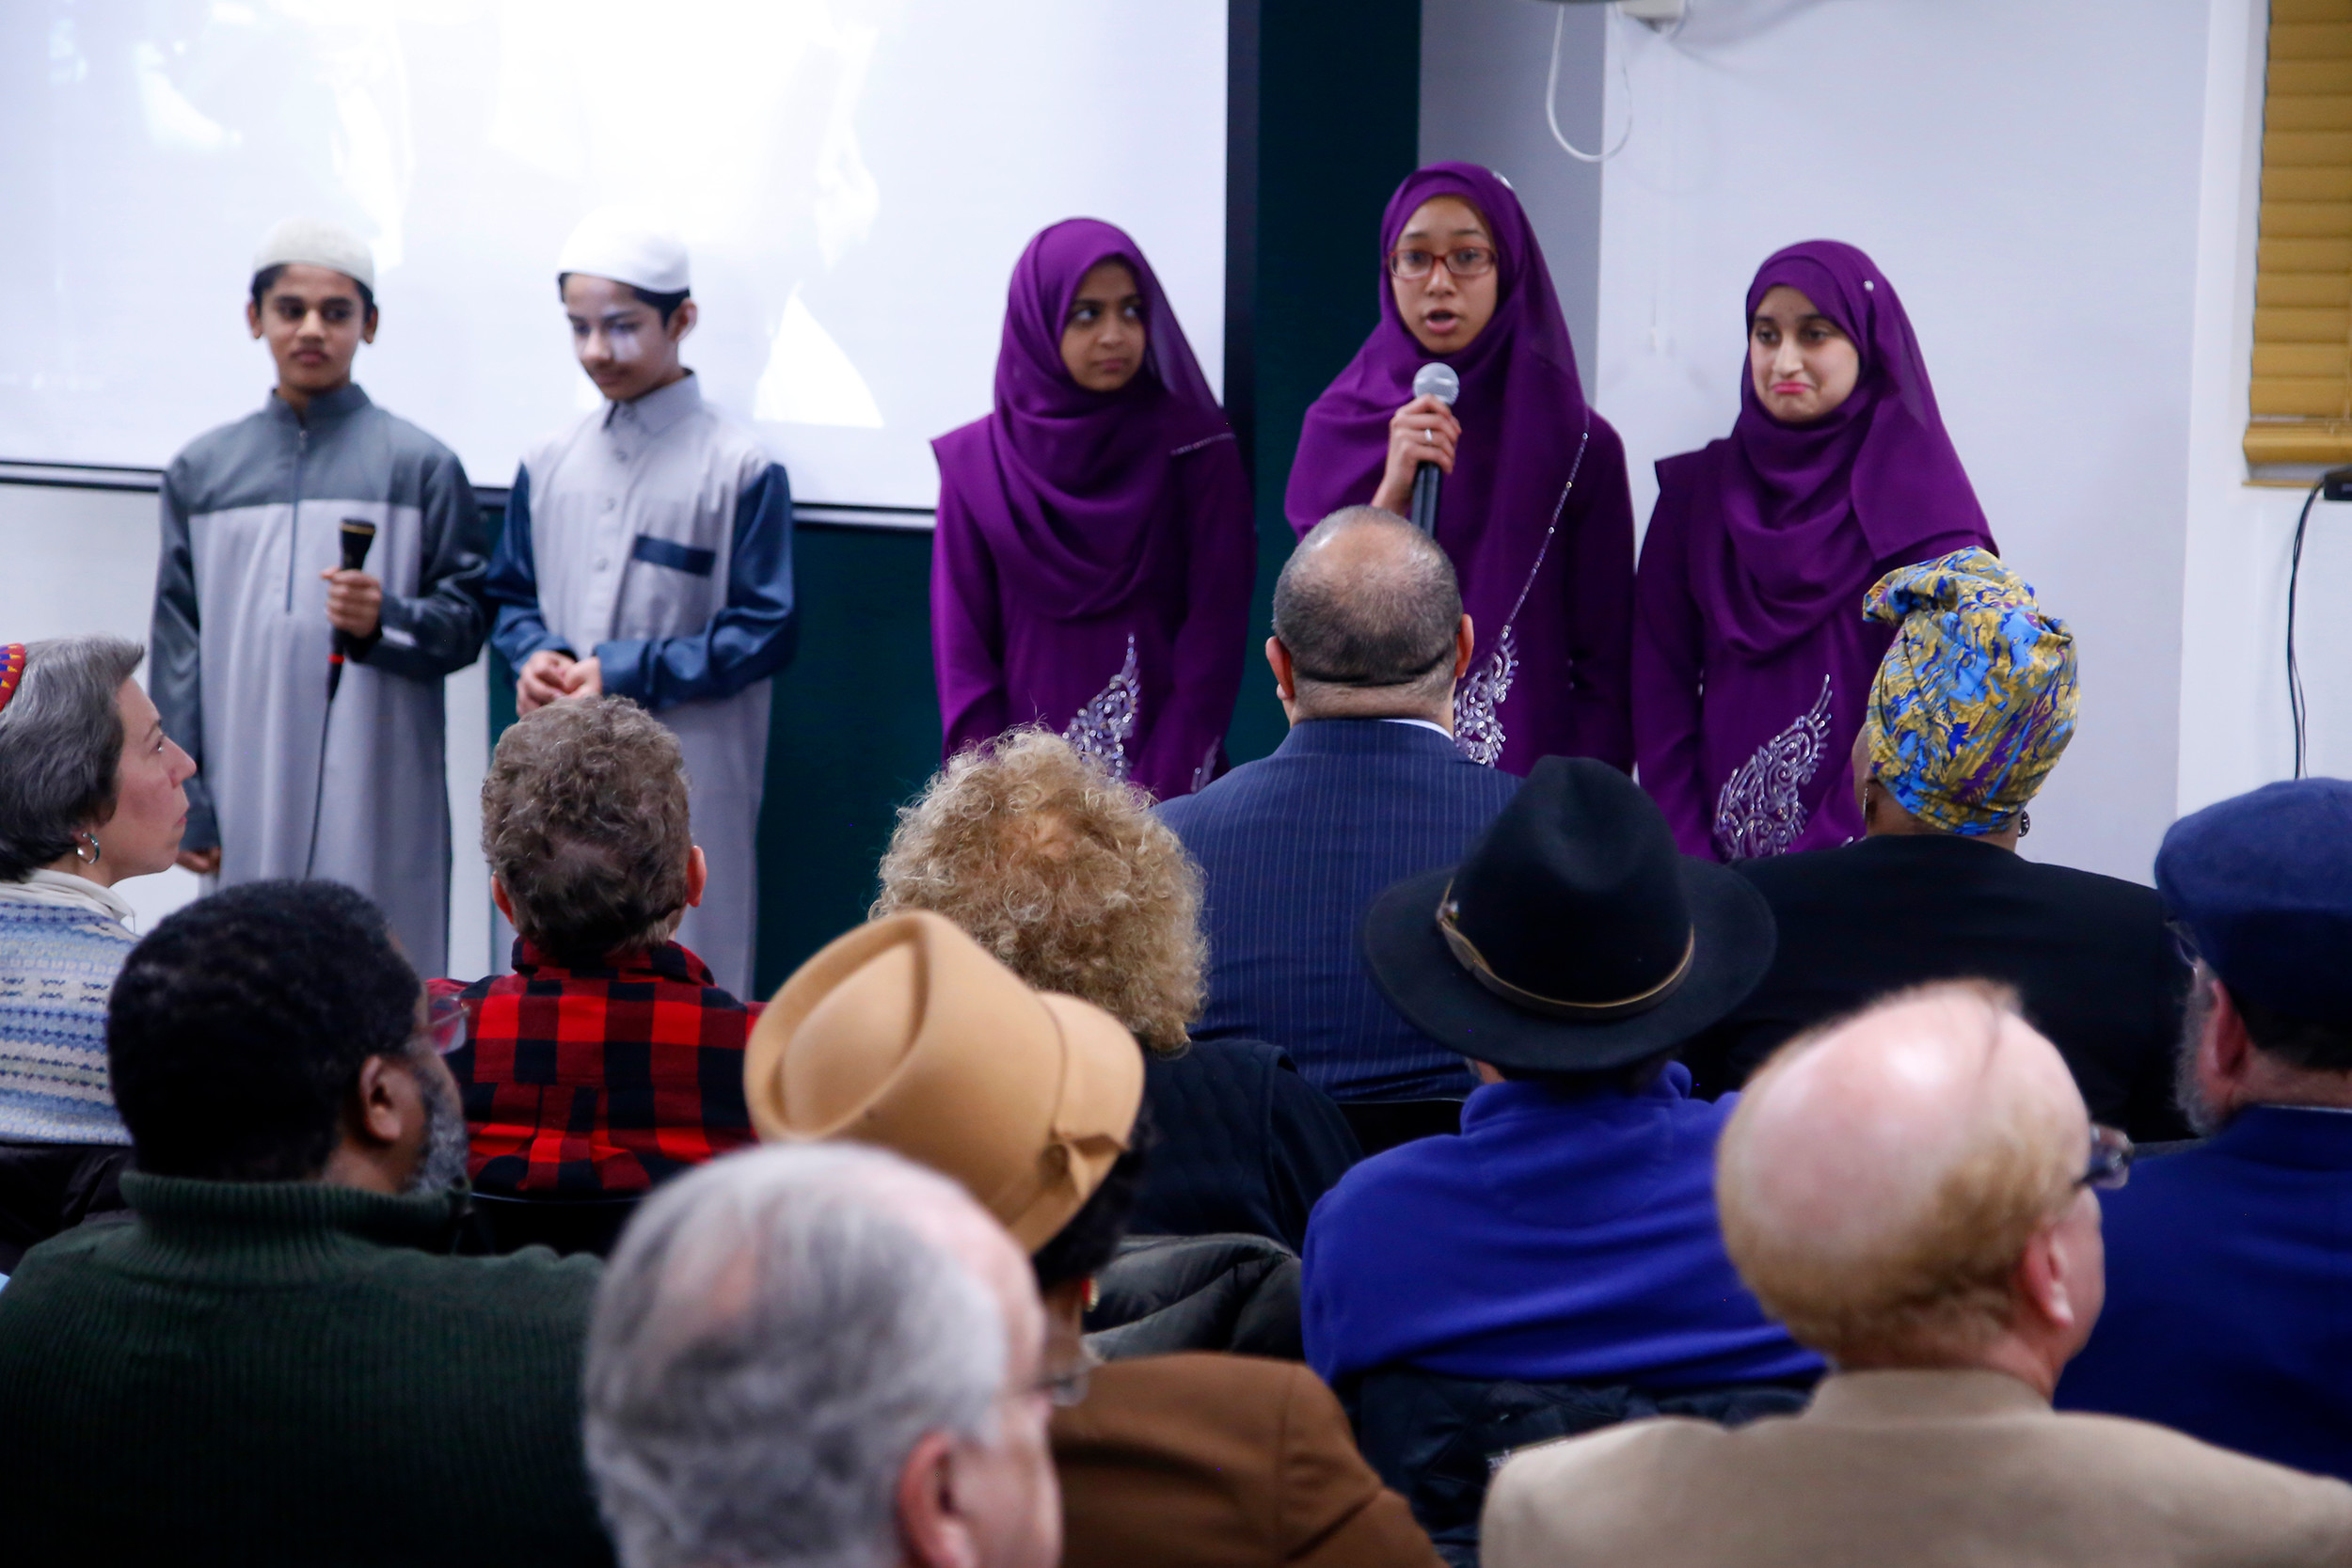 Students from the Hamza Academy made a presentation about King’s legacy.